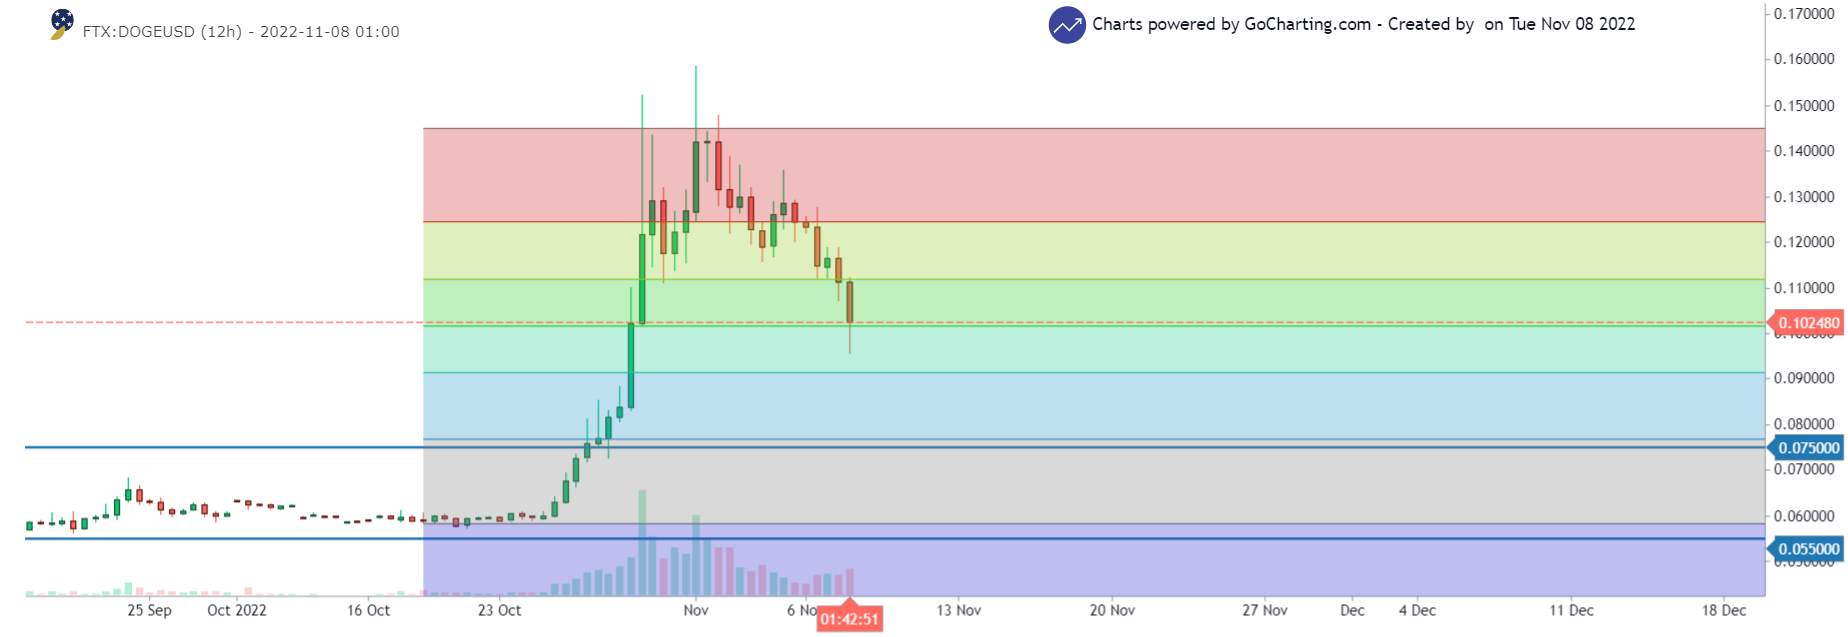 DOGE/USD 12-hours chart showing the Dogecoin crash